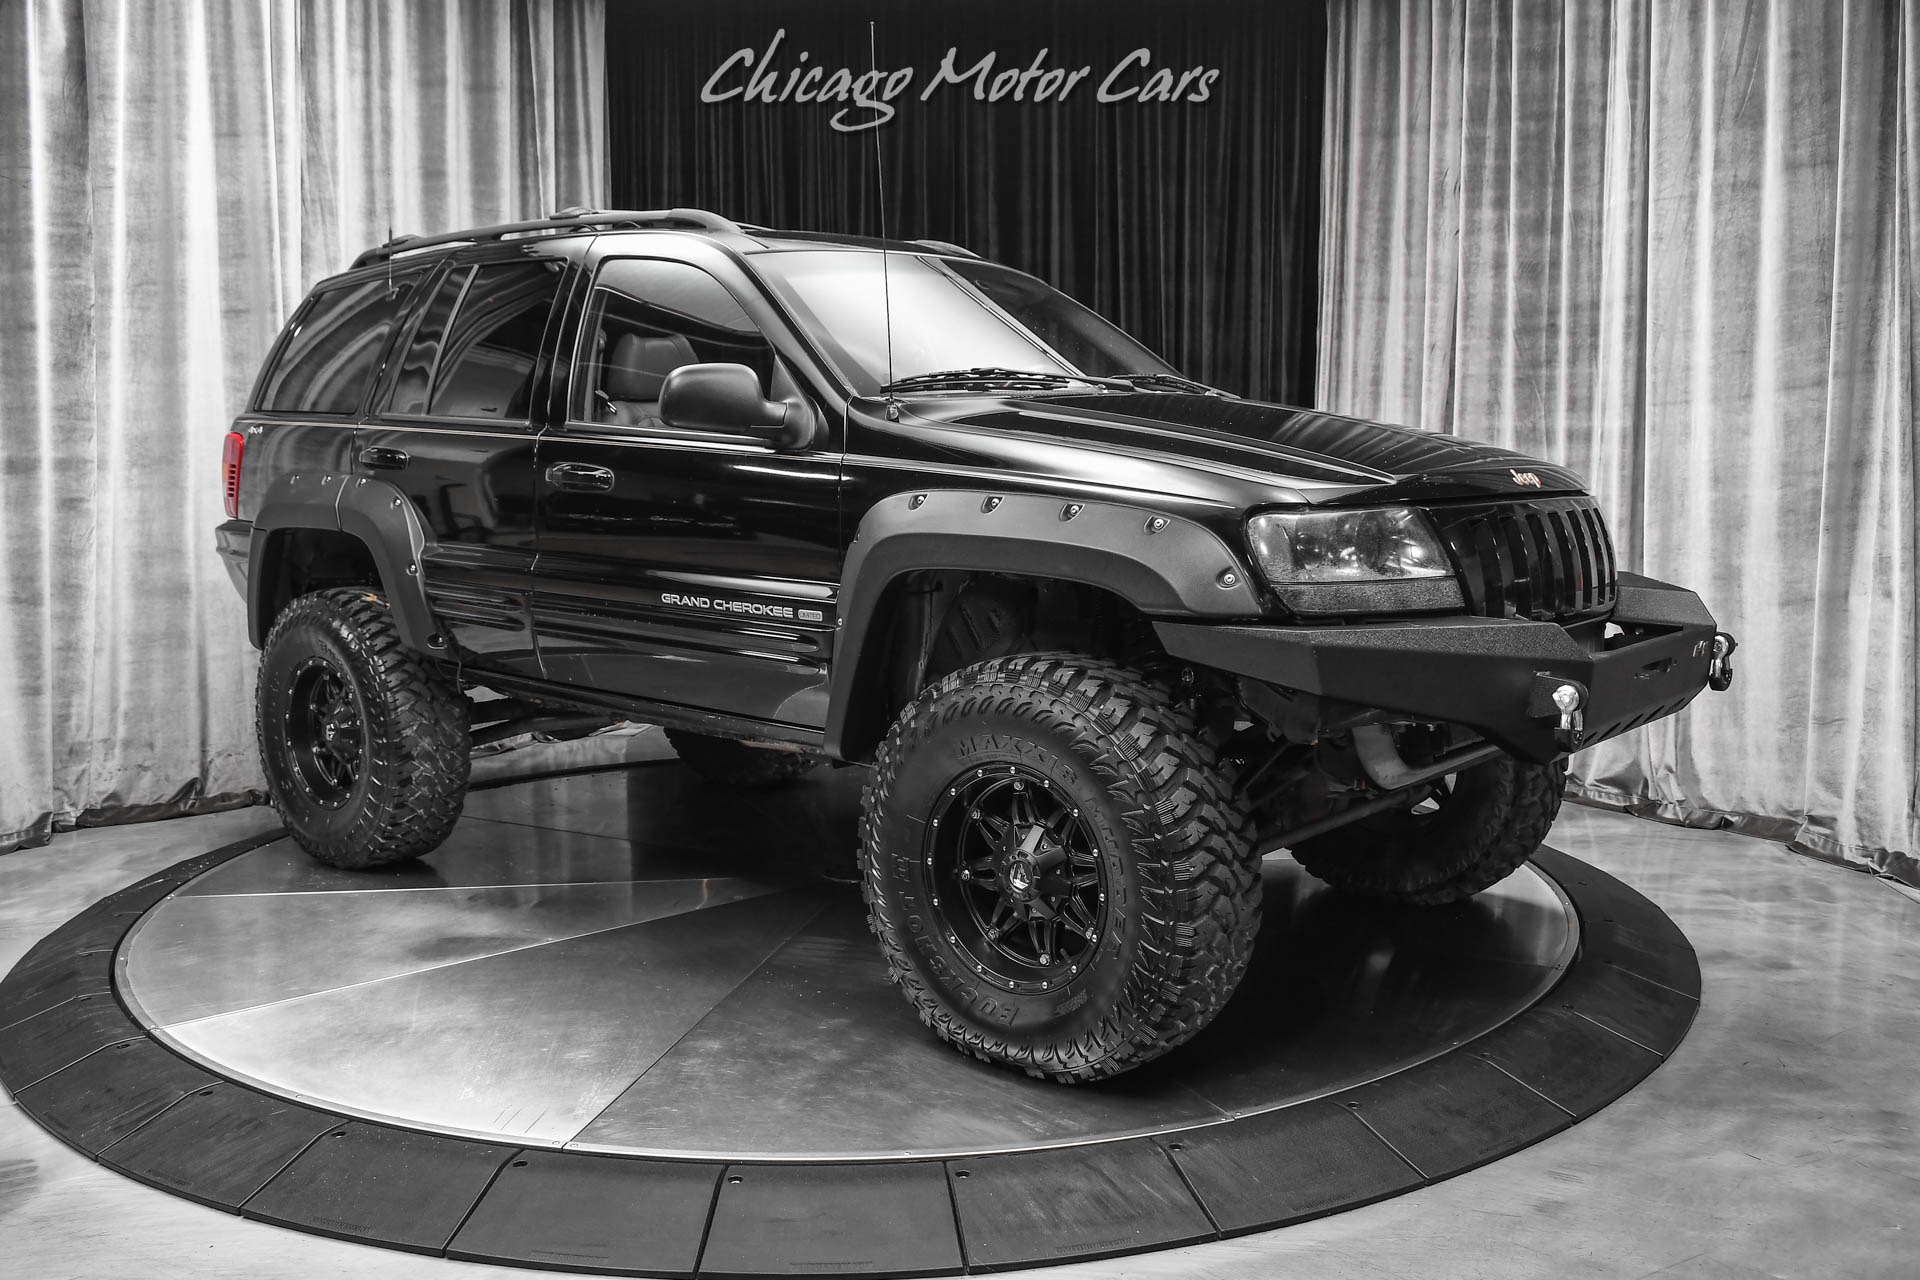 Used-1999-Jeep-Grand-Cherokee-Limited-SUV-4WD-Power-Pkg-47L-V8-Lifted-Fuel-Wheels-LOADED